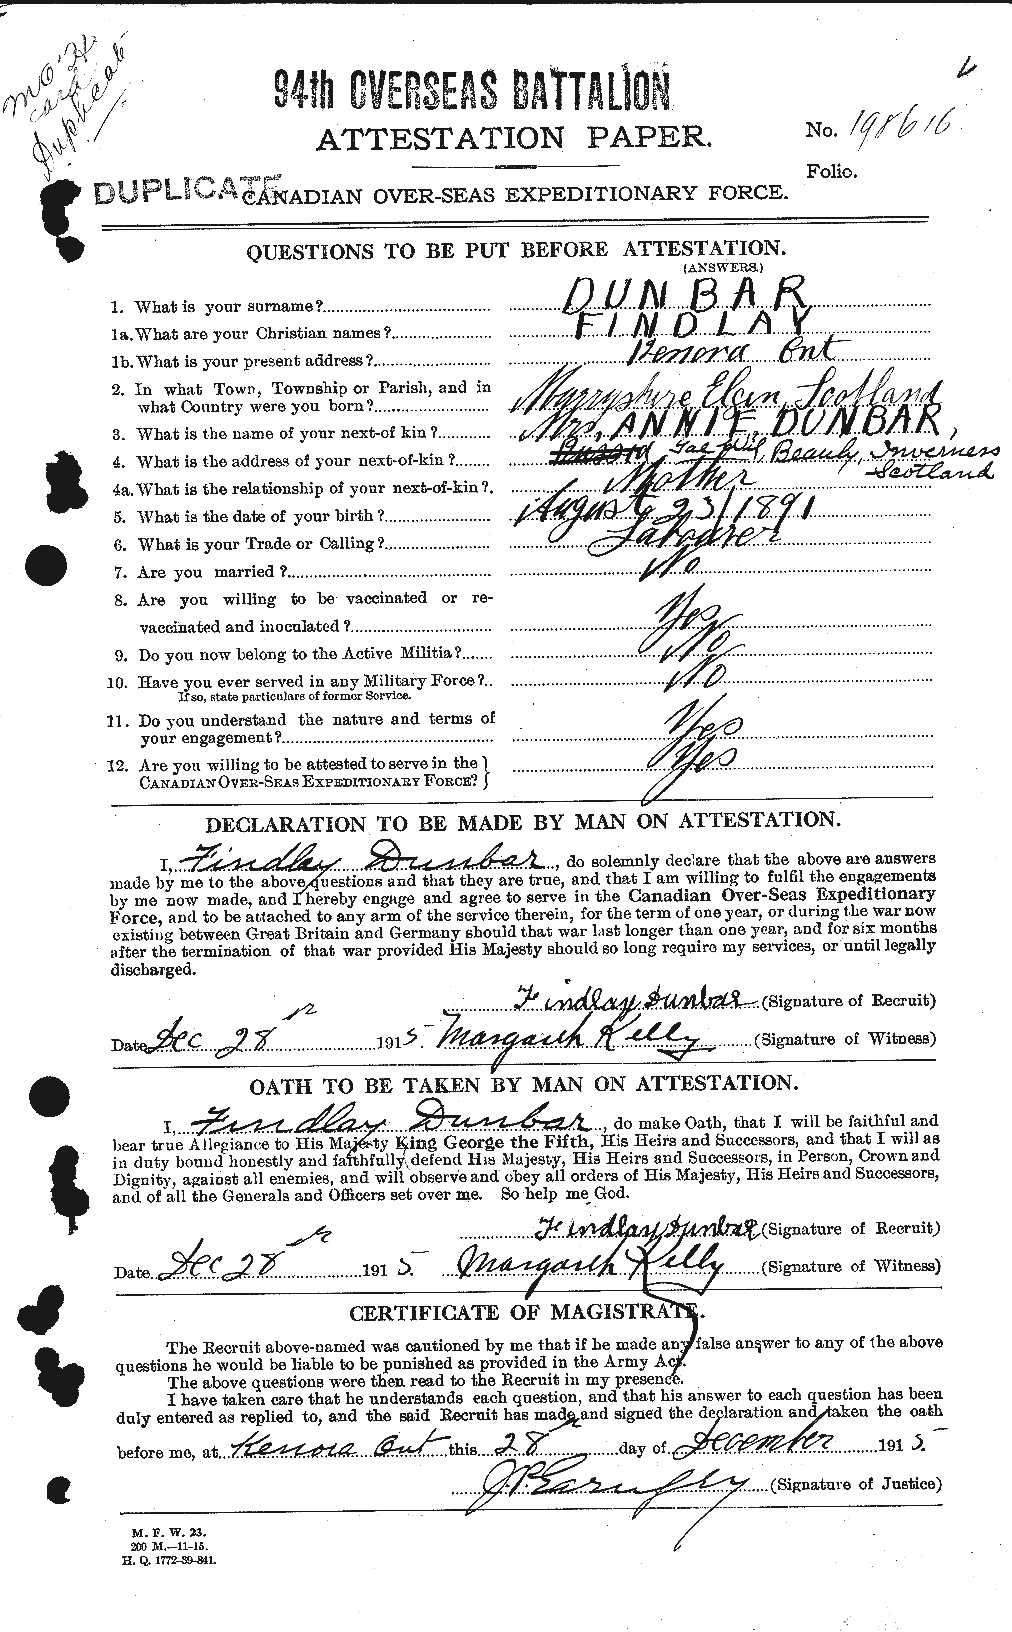 Personnel Records of the First World War - CEF 301487a